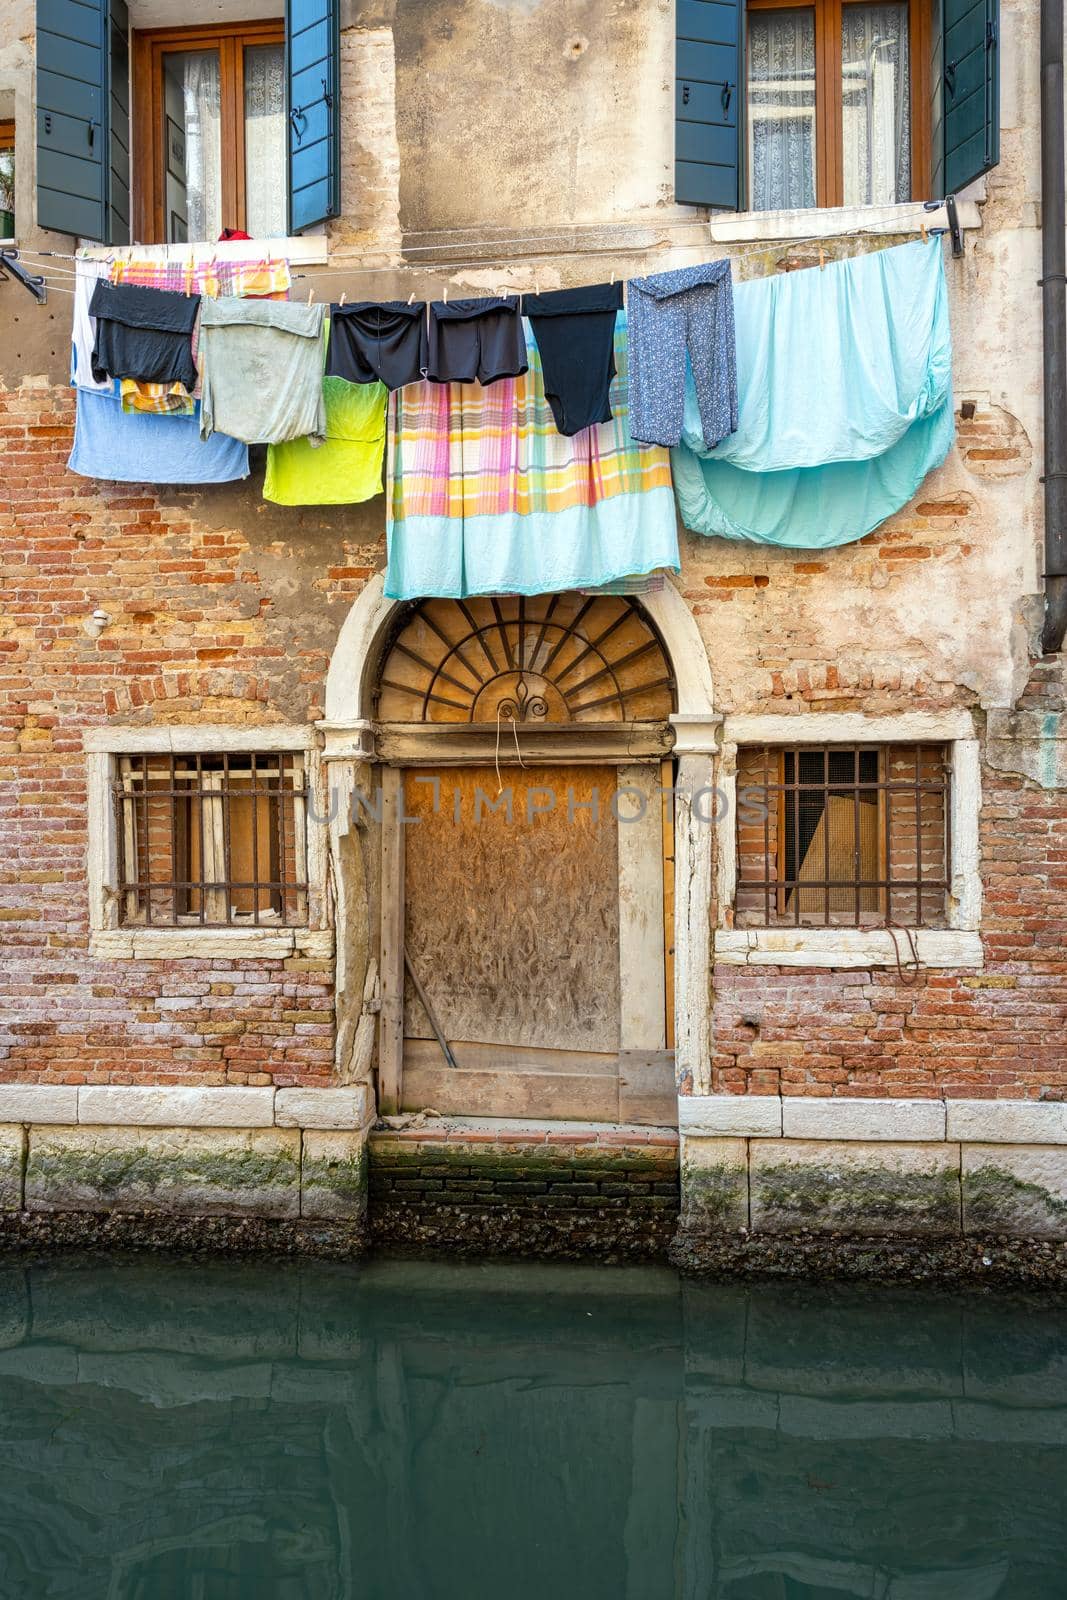 Small canal in Venice with clothesline and laundry